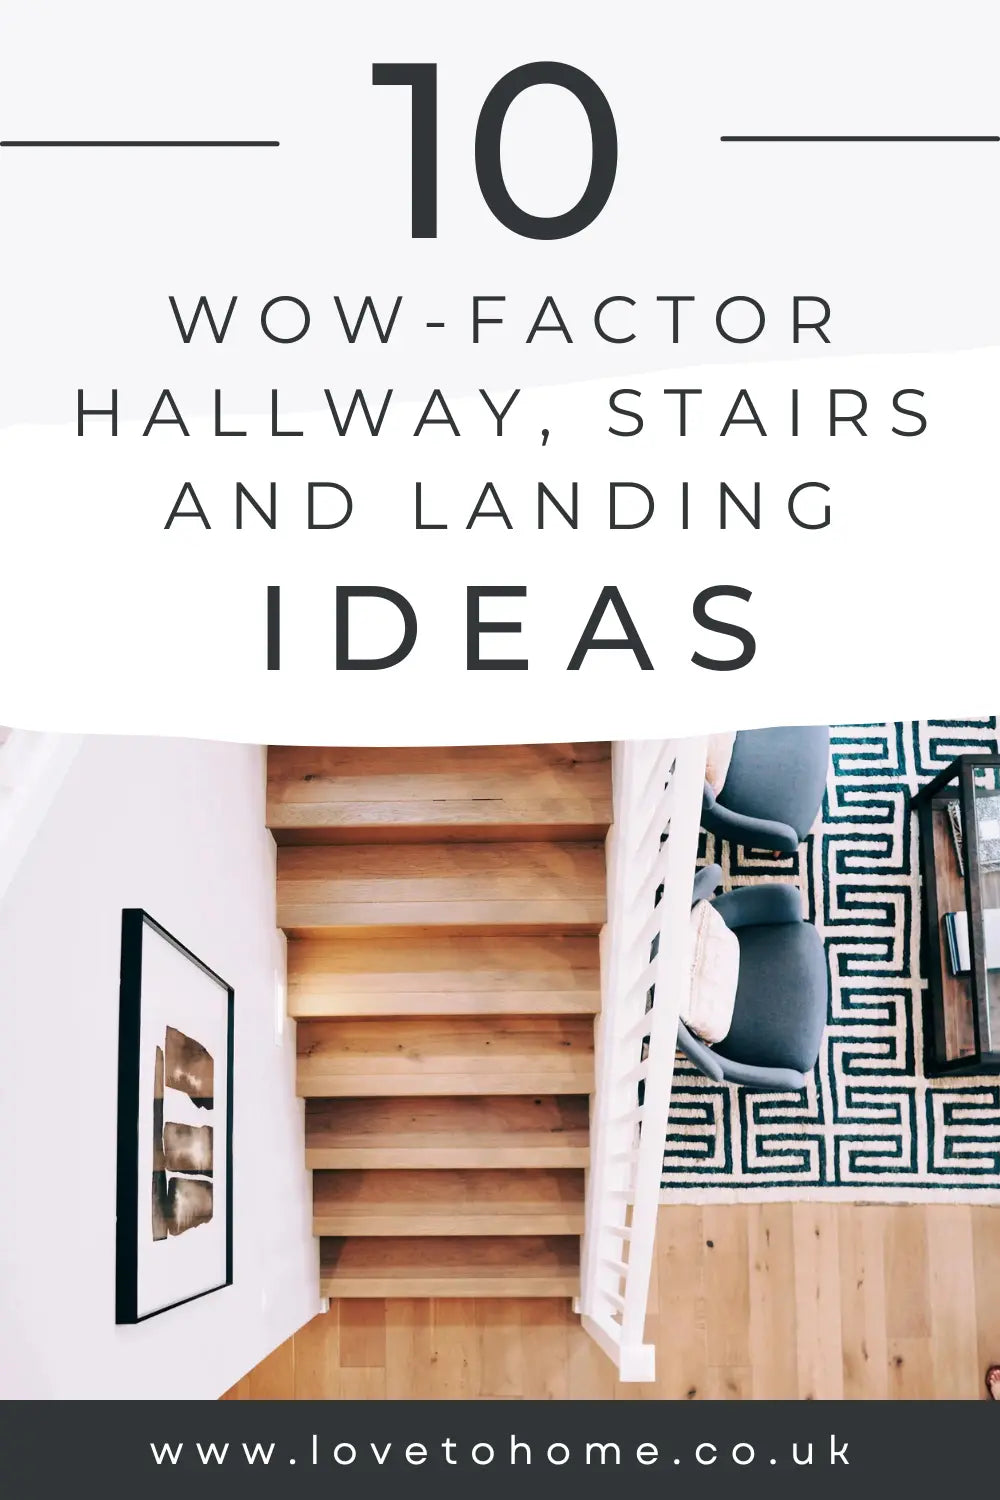 10 Wow-Factor Hallway, Stairs and Landing Ideas – Love to Home